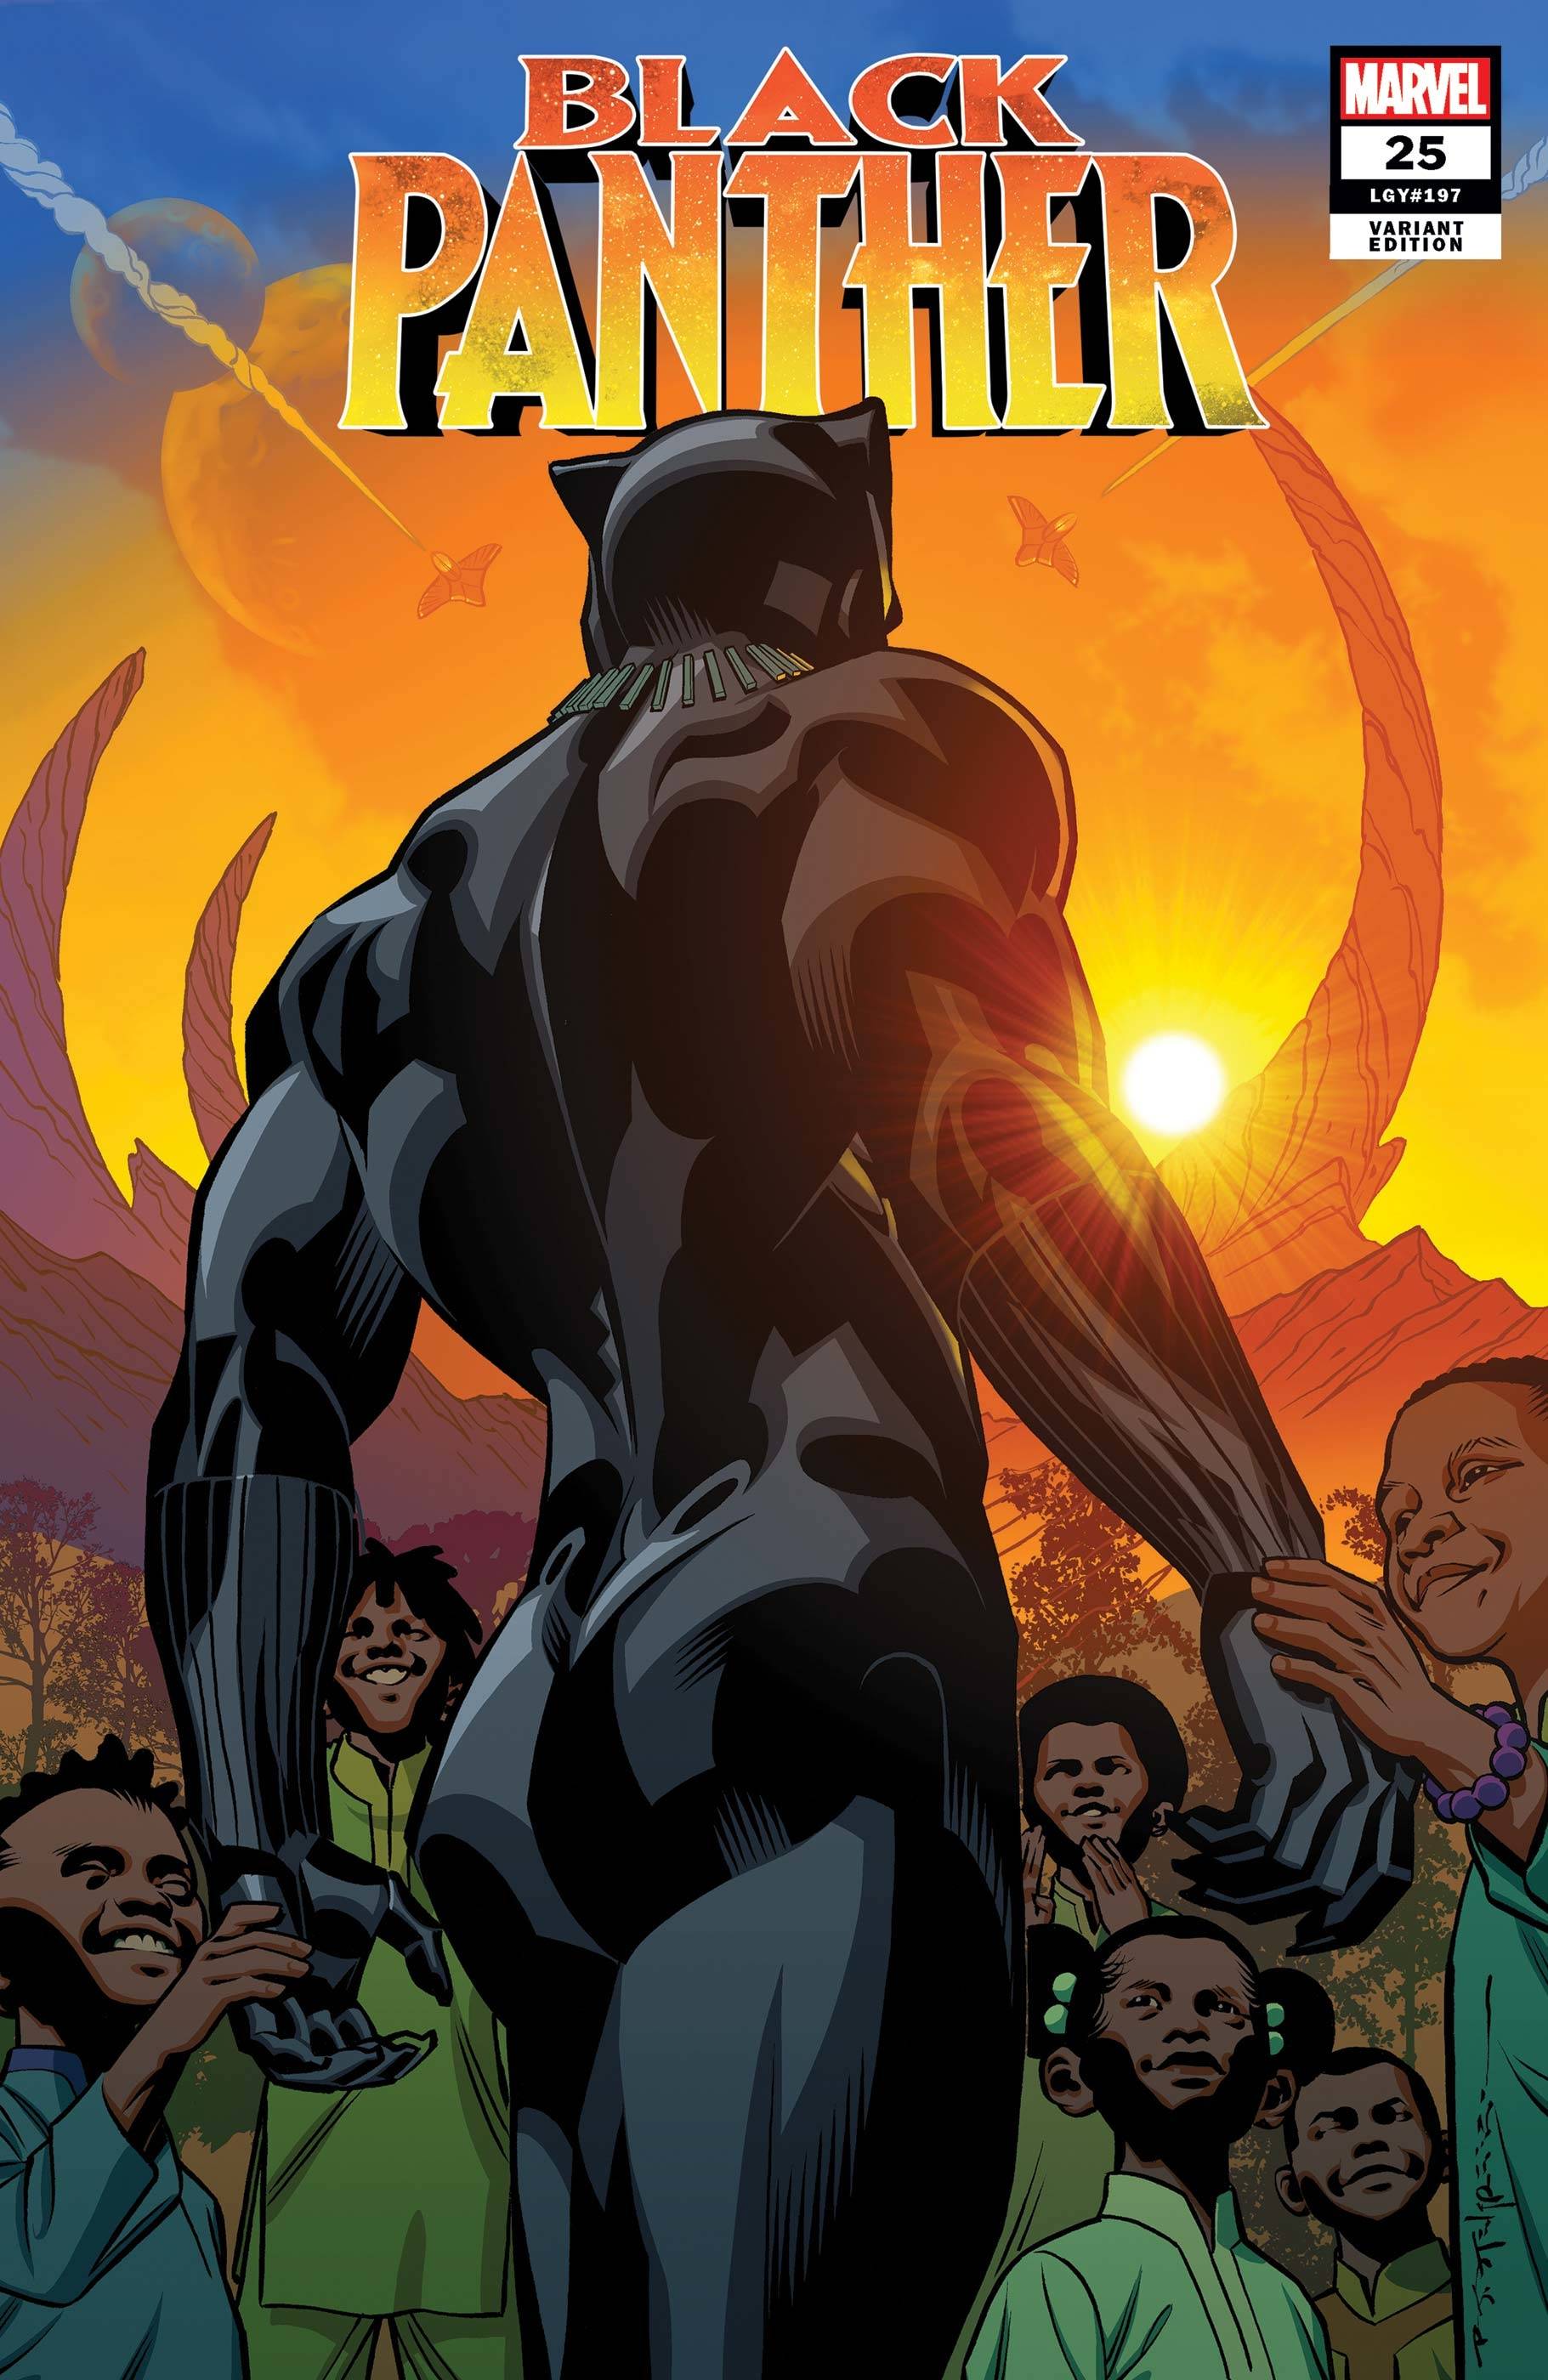 Black Panther #25 Stelfreeze Final Issue Variant (2018)